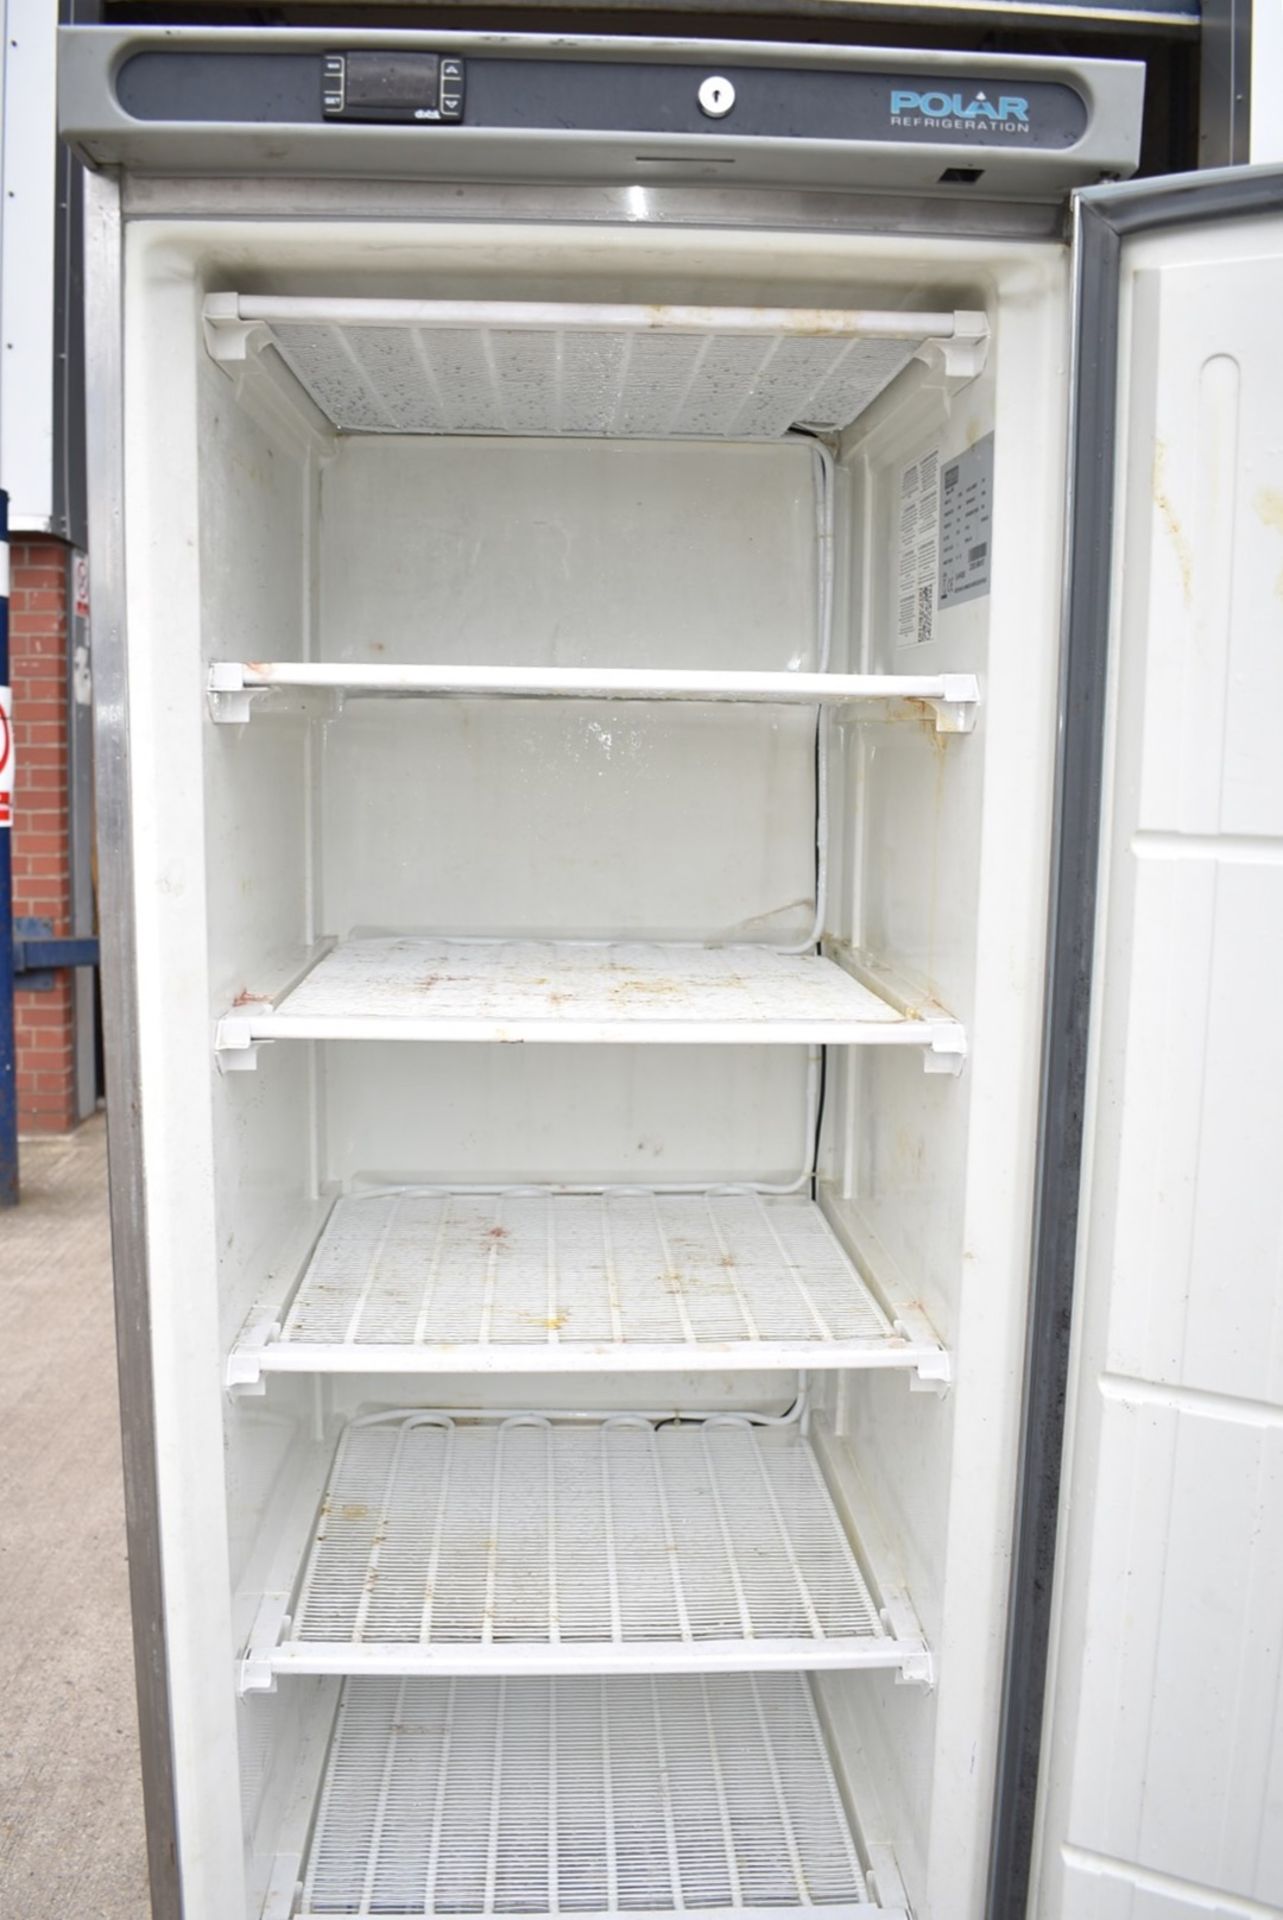 1 x Polar CD083 Upright Freezer With Stainless Steel Exterior - Dimensions: H185 x W60 x D60 cms - Image 7 of 10